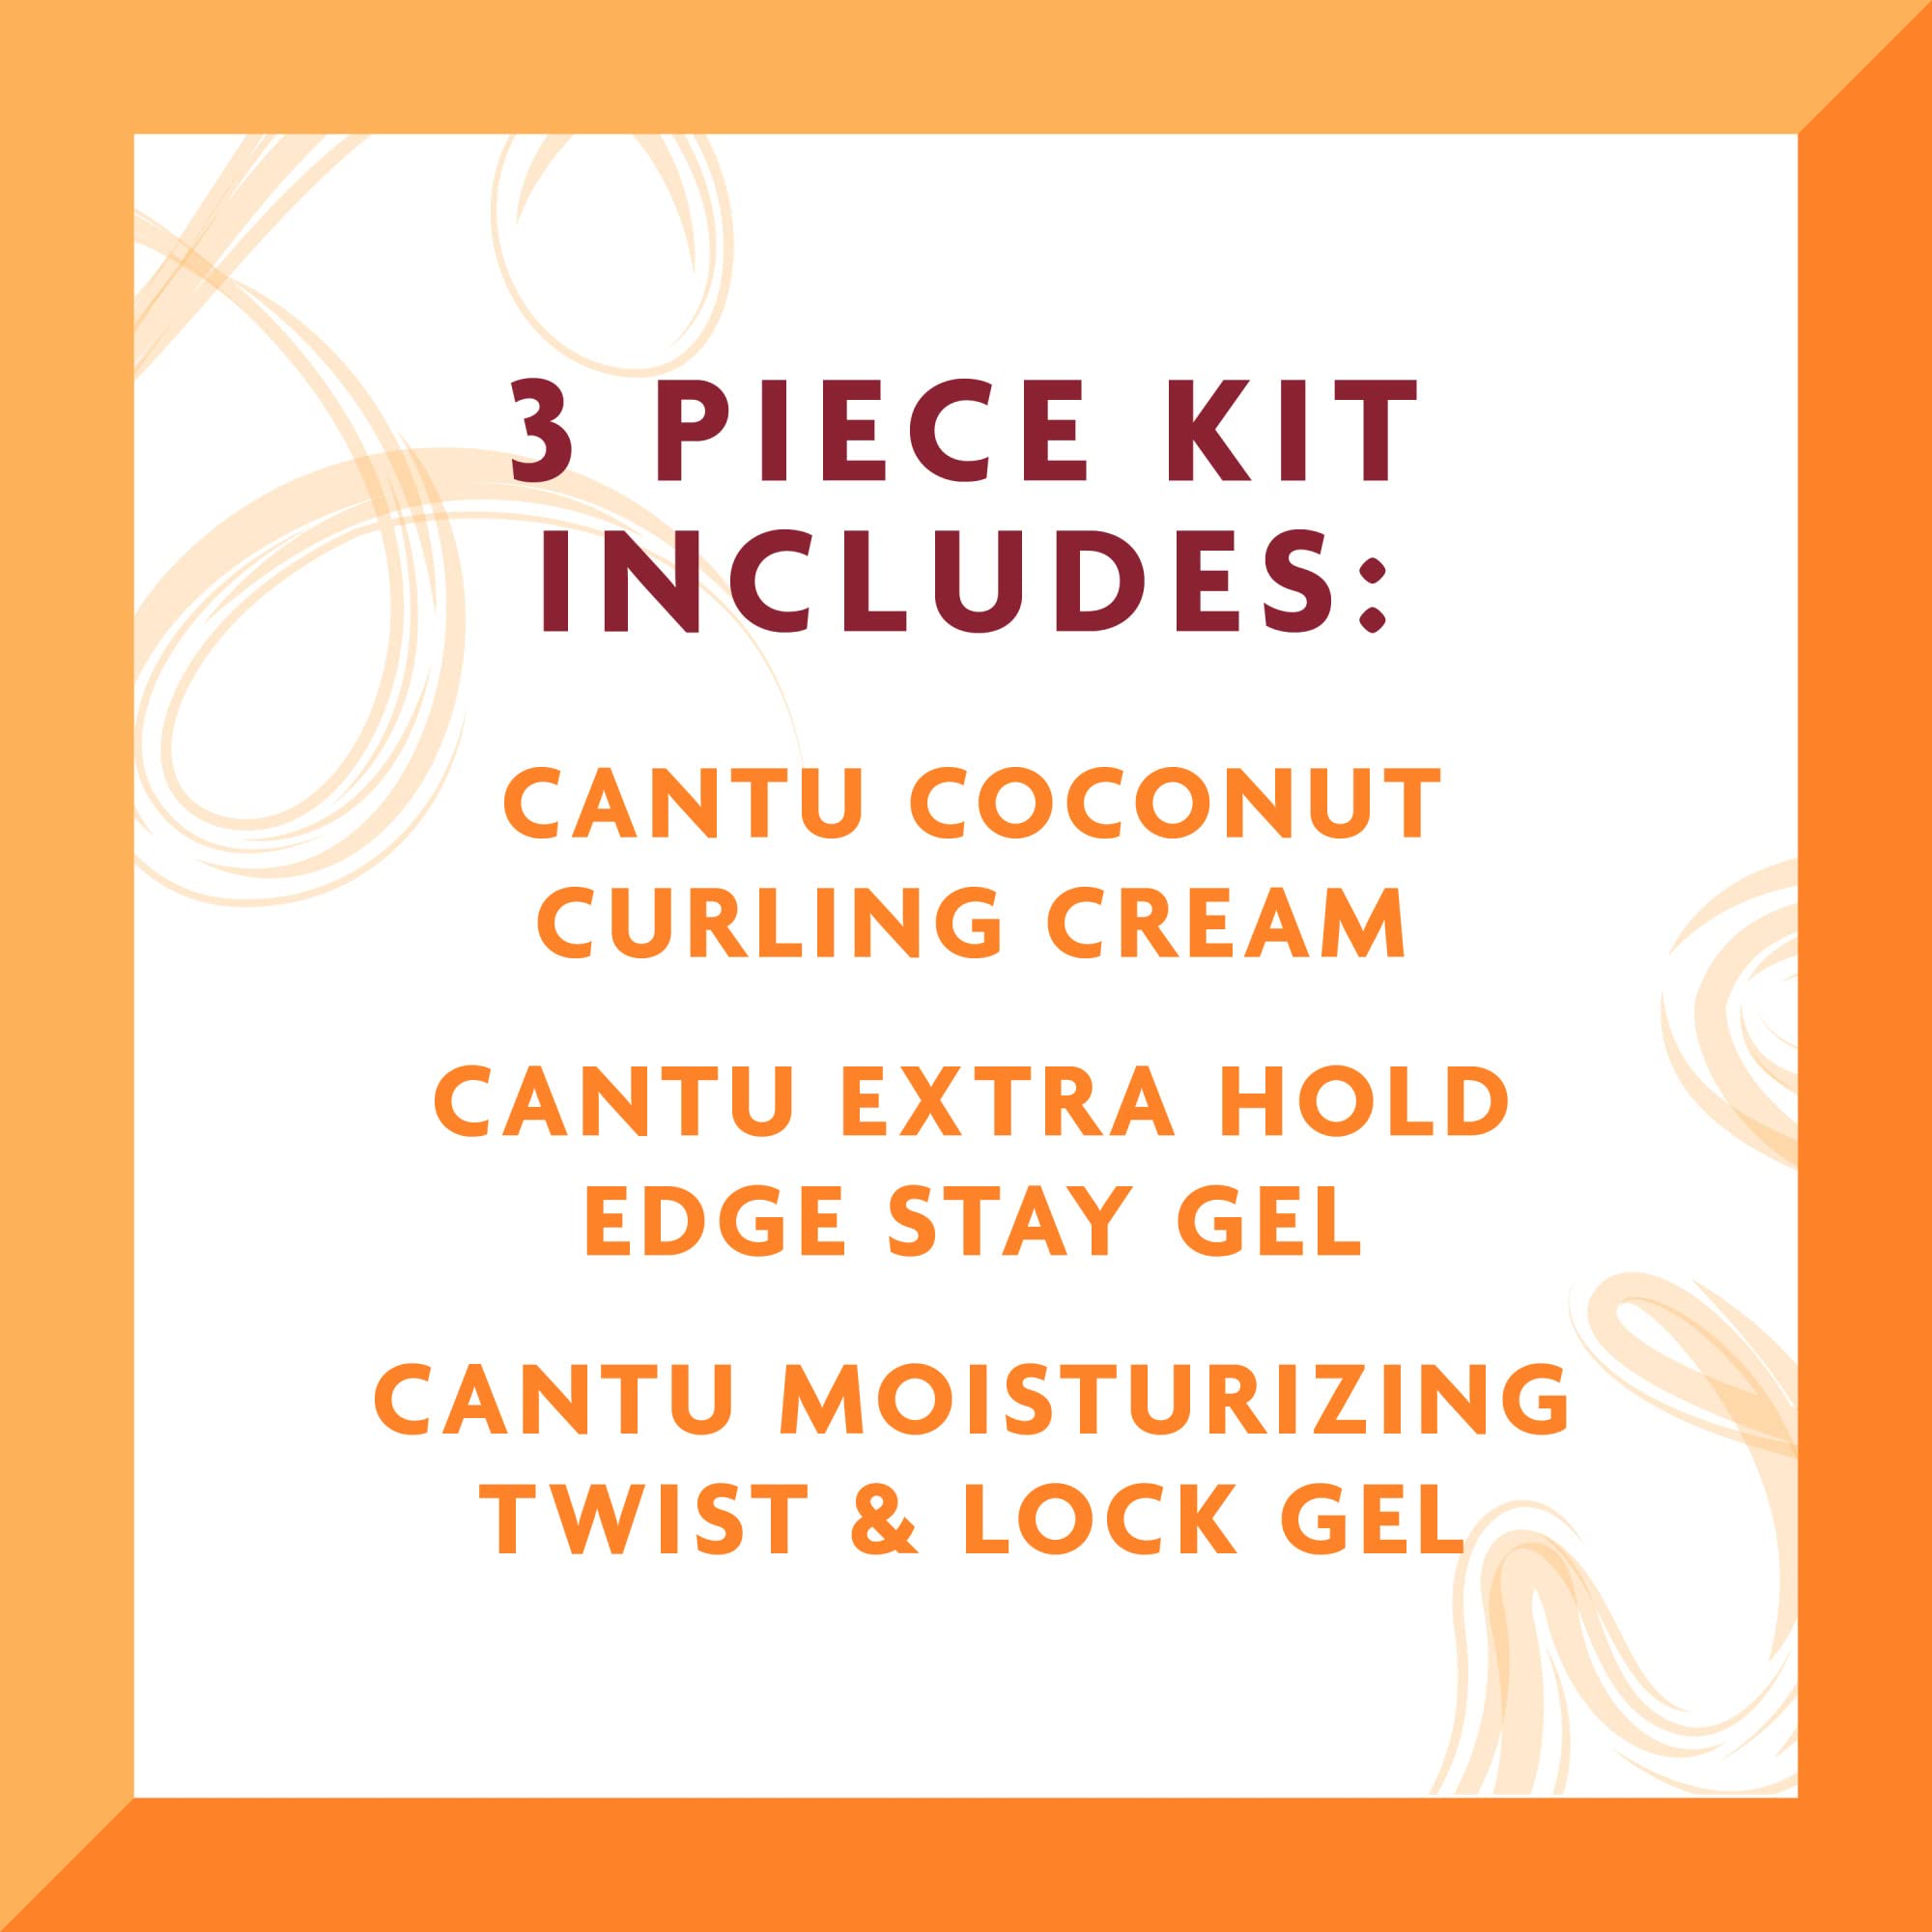 Cantu Hair Treatment Kit with Coconut Curling Cream, Edge Stay Gel, and Twist & Lock Gel with Shea Butter for Natural Hair (Packaging May Vary)